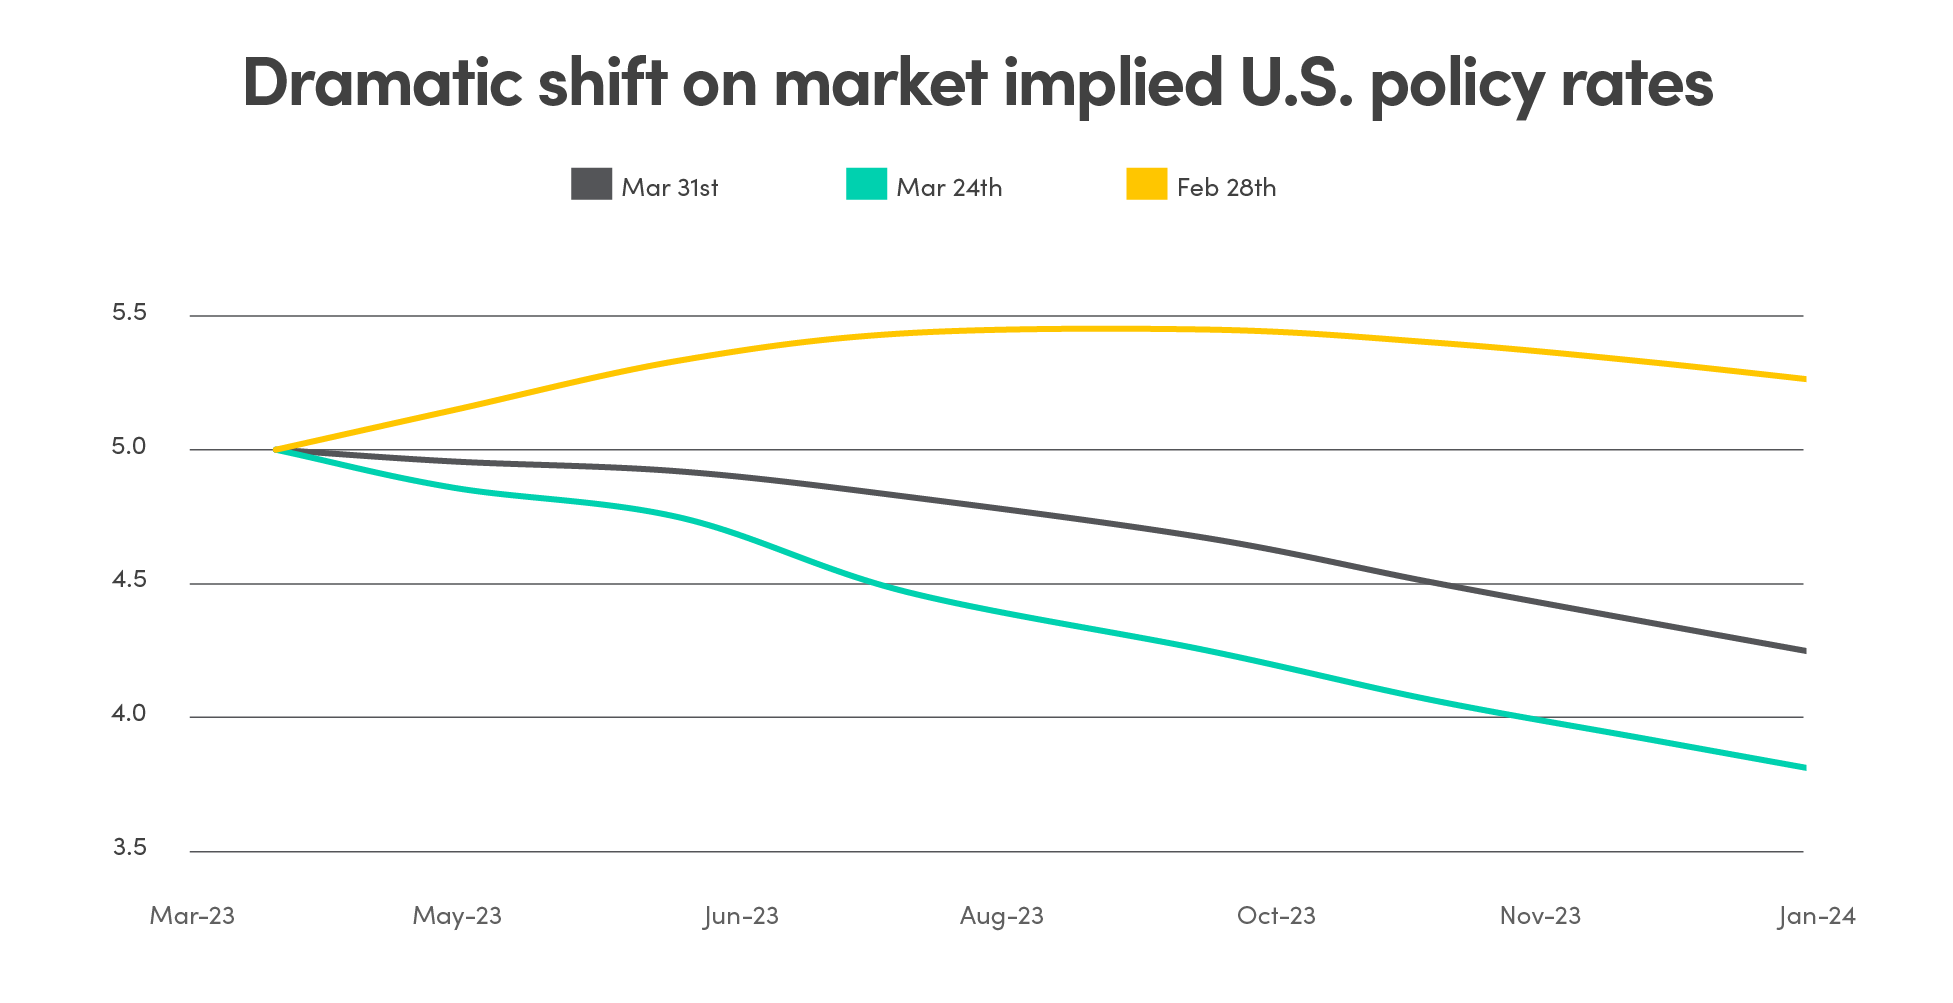 Line graph showing dramatic shift on market implied US policy rates, projections from March 2023 to January 2024.